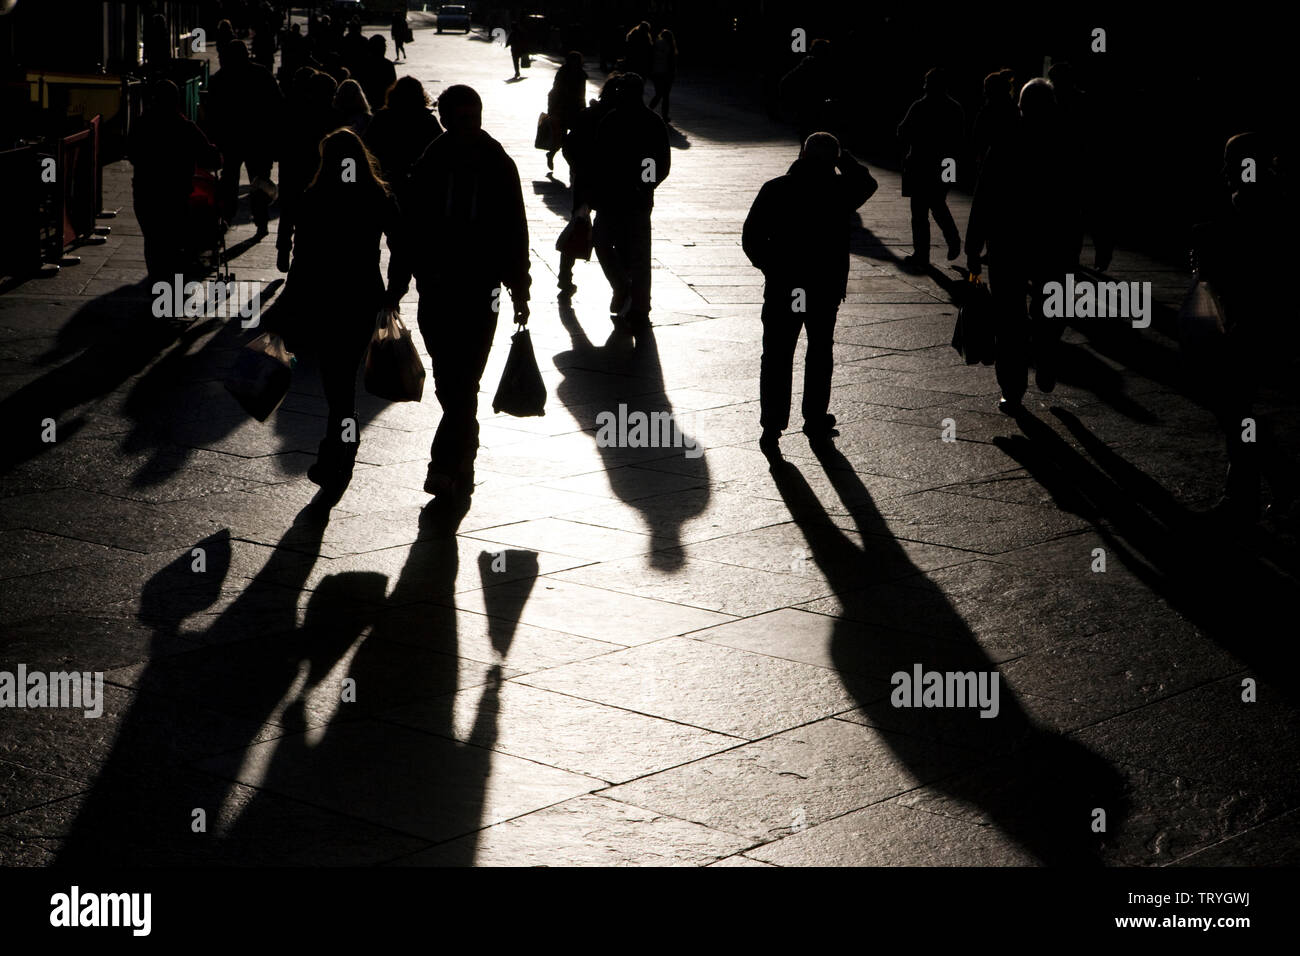 The long shadows of shoppers in a high street in Newcastle upon Tyne, England Stock Photo